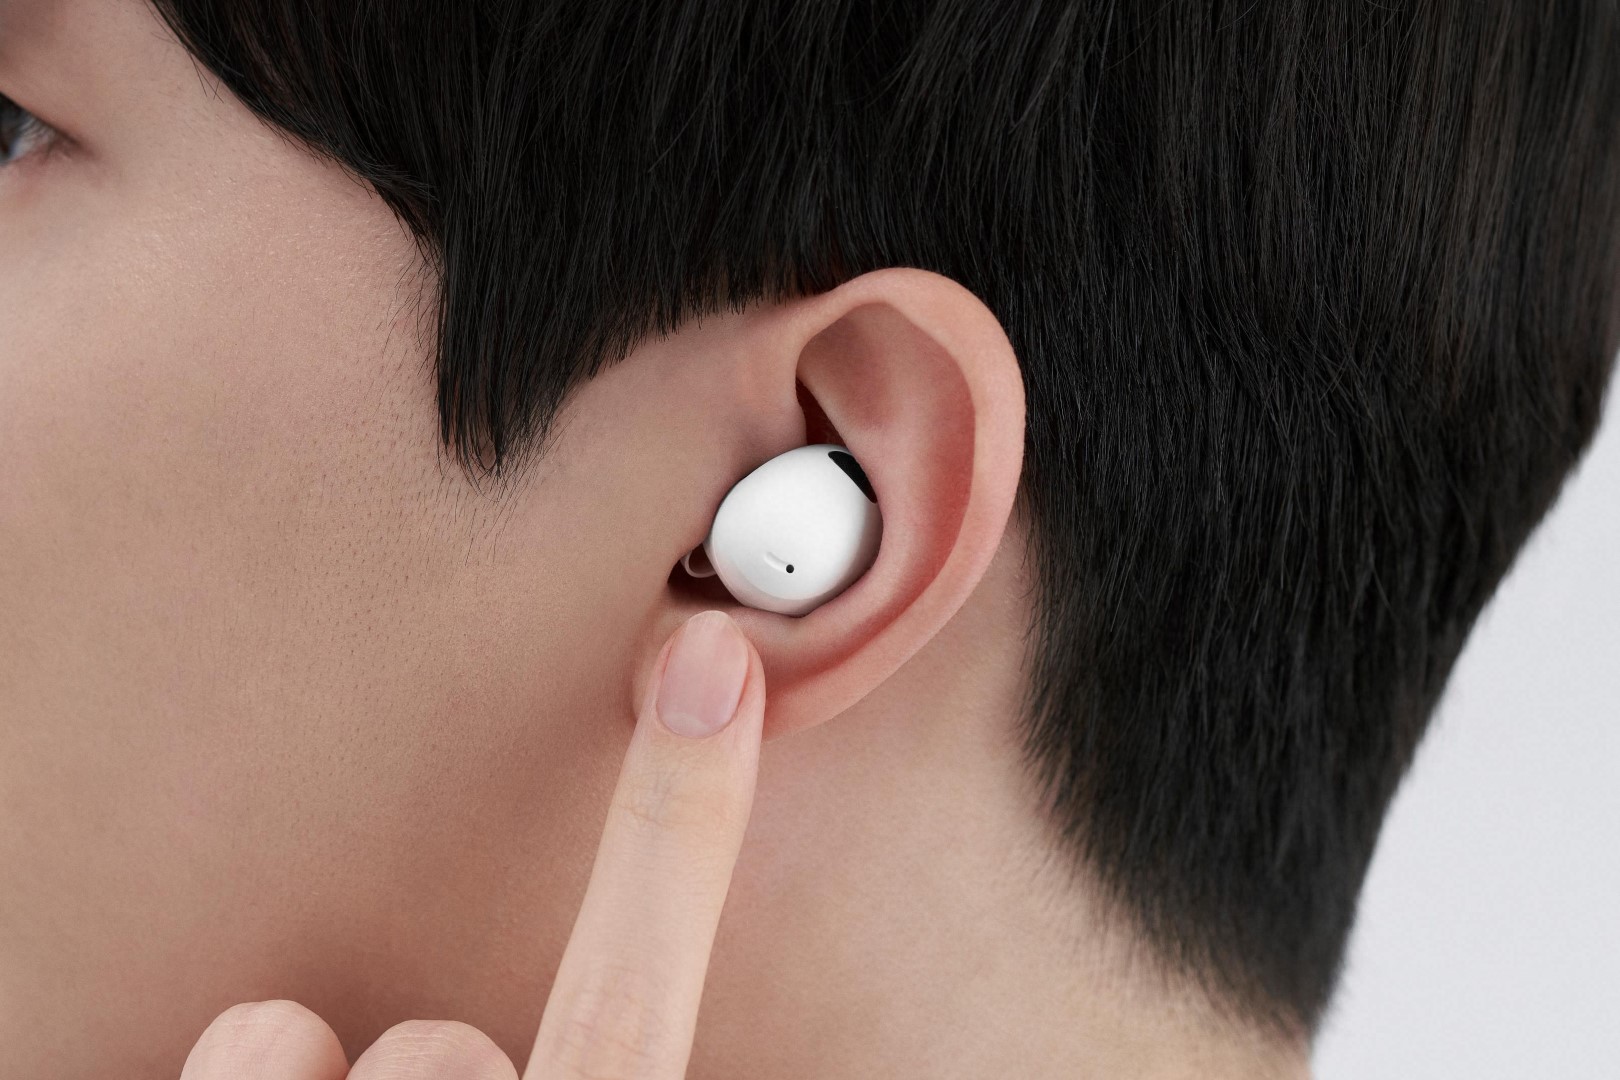 Samsung Galaxy Buds2 Pro launched with proprietary Seamless Hi-Fi audio  codec and IPX7 rating for €229 -  News